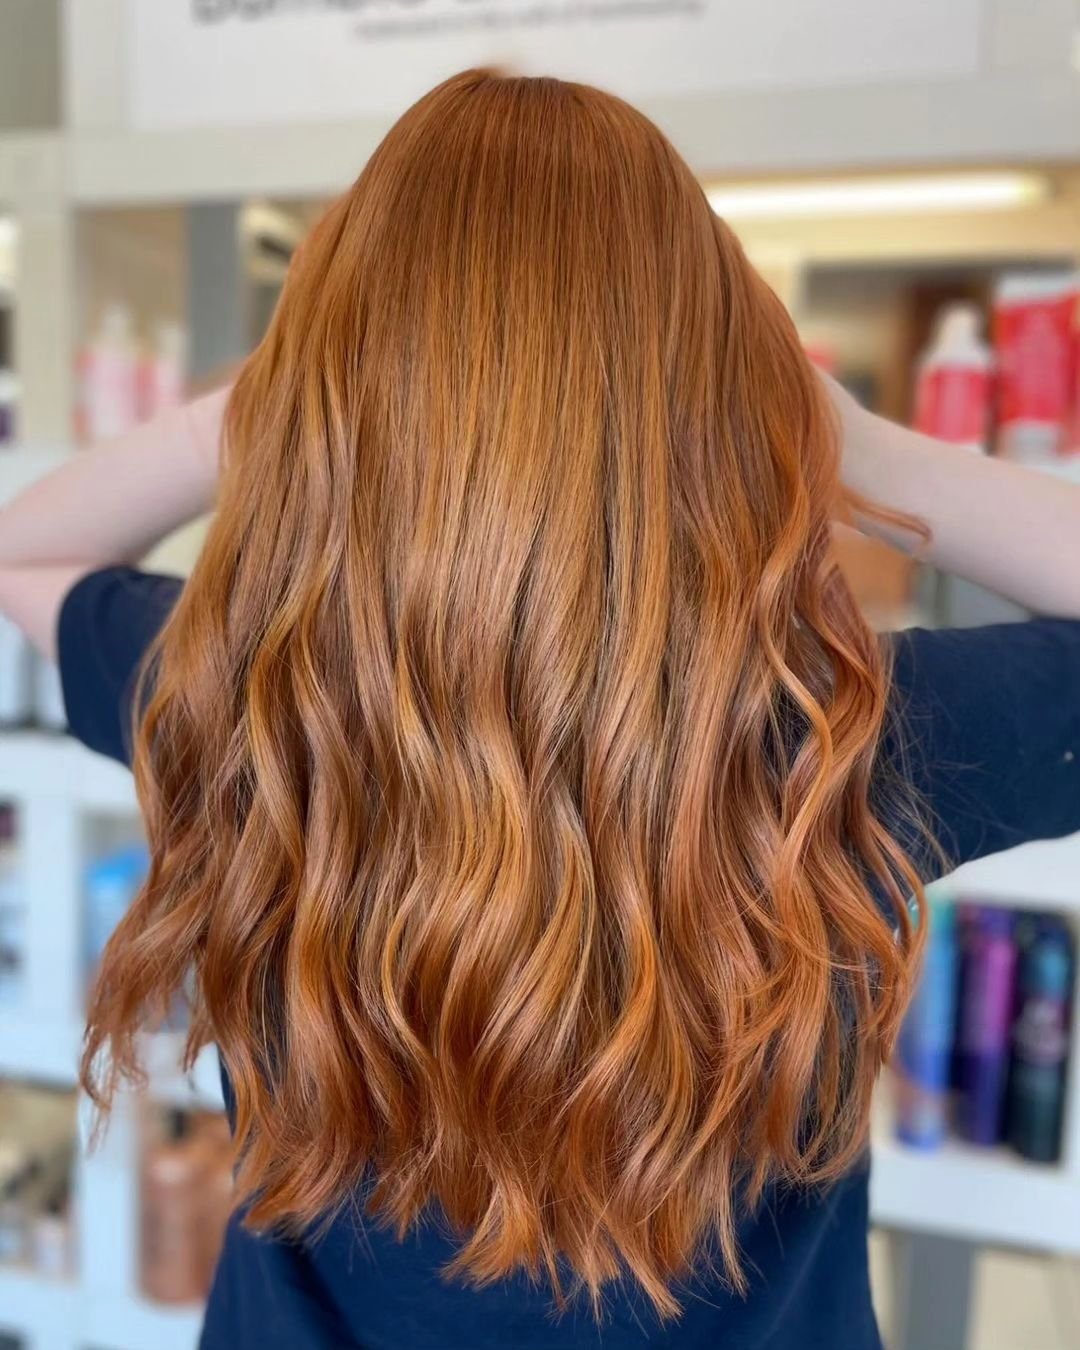 Ginger dreams by @donebydevon. 🧡 Devon is an incredible haircolorist who loves finding the least painful path to your goals. If you love impactful color that wears long-term she might be the right hairdresser for you! 

Stay tuned this evening for o